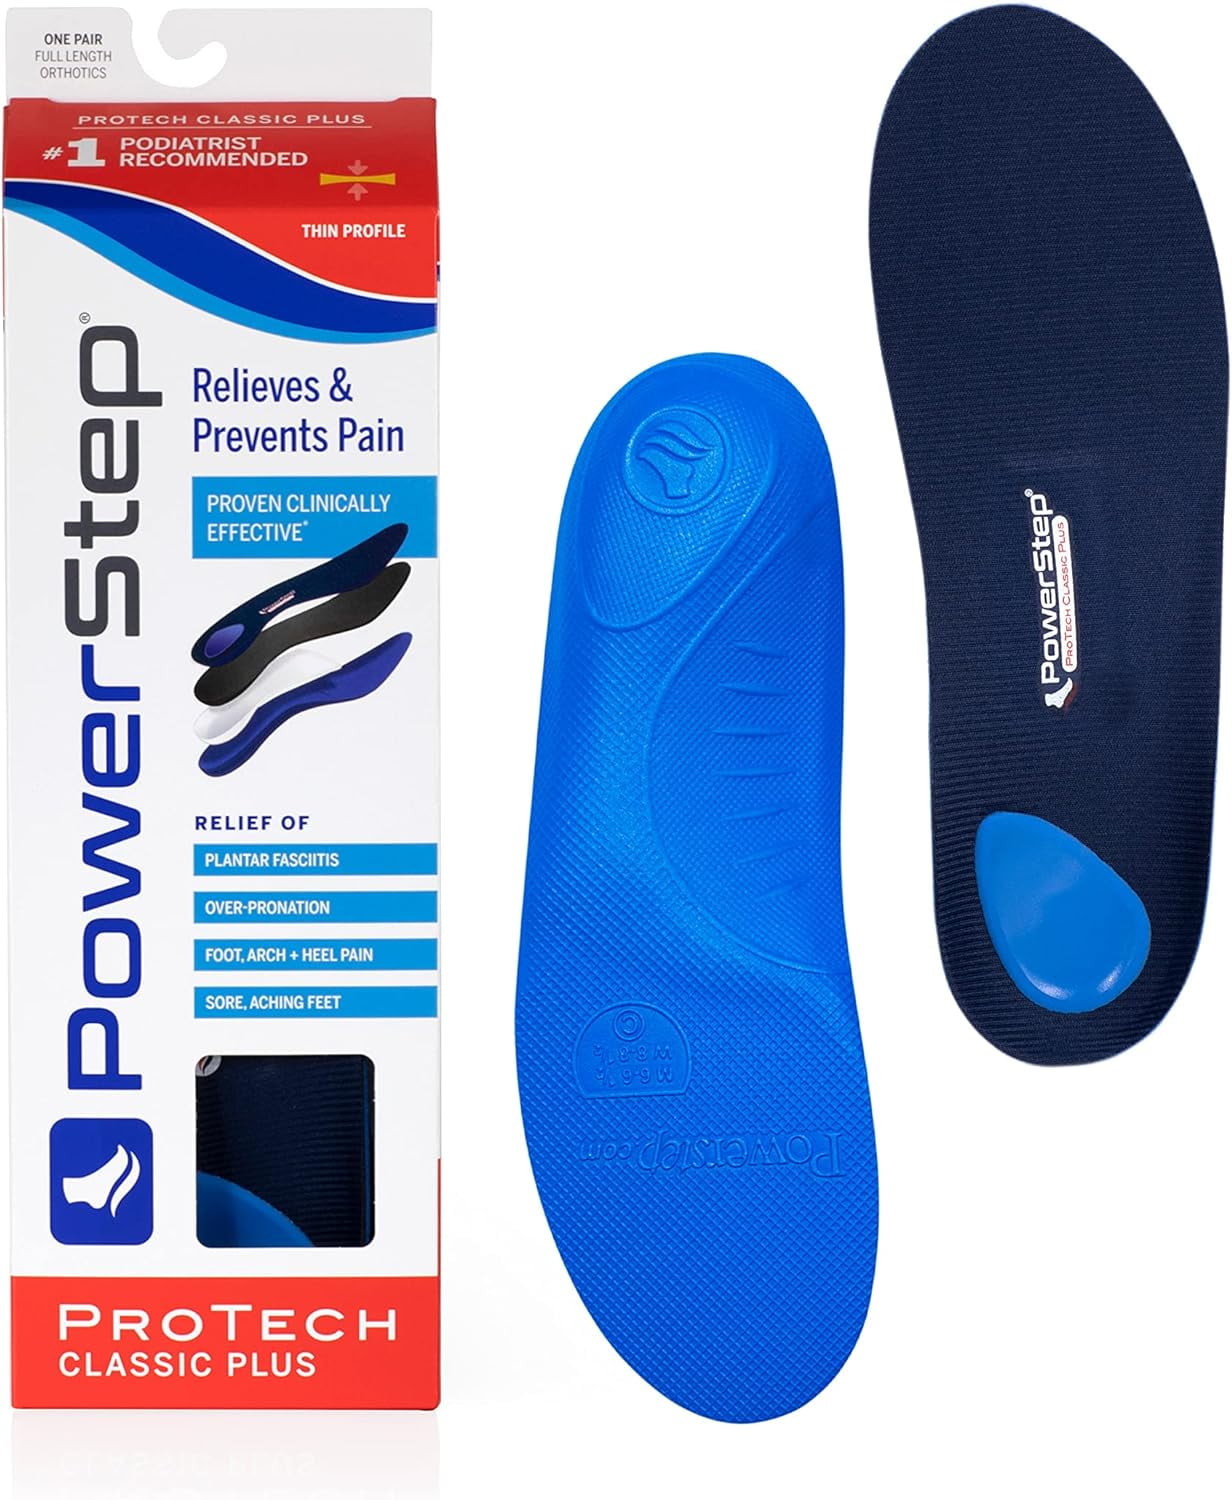 Powerstep Protech Classic Full Length Orthotic Insole Shoe Inserts ...